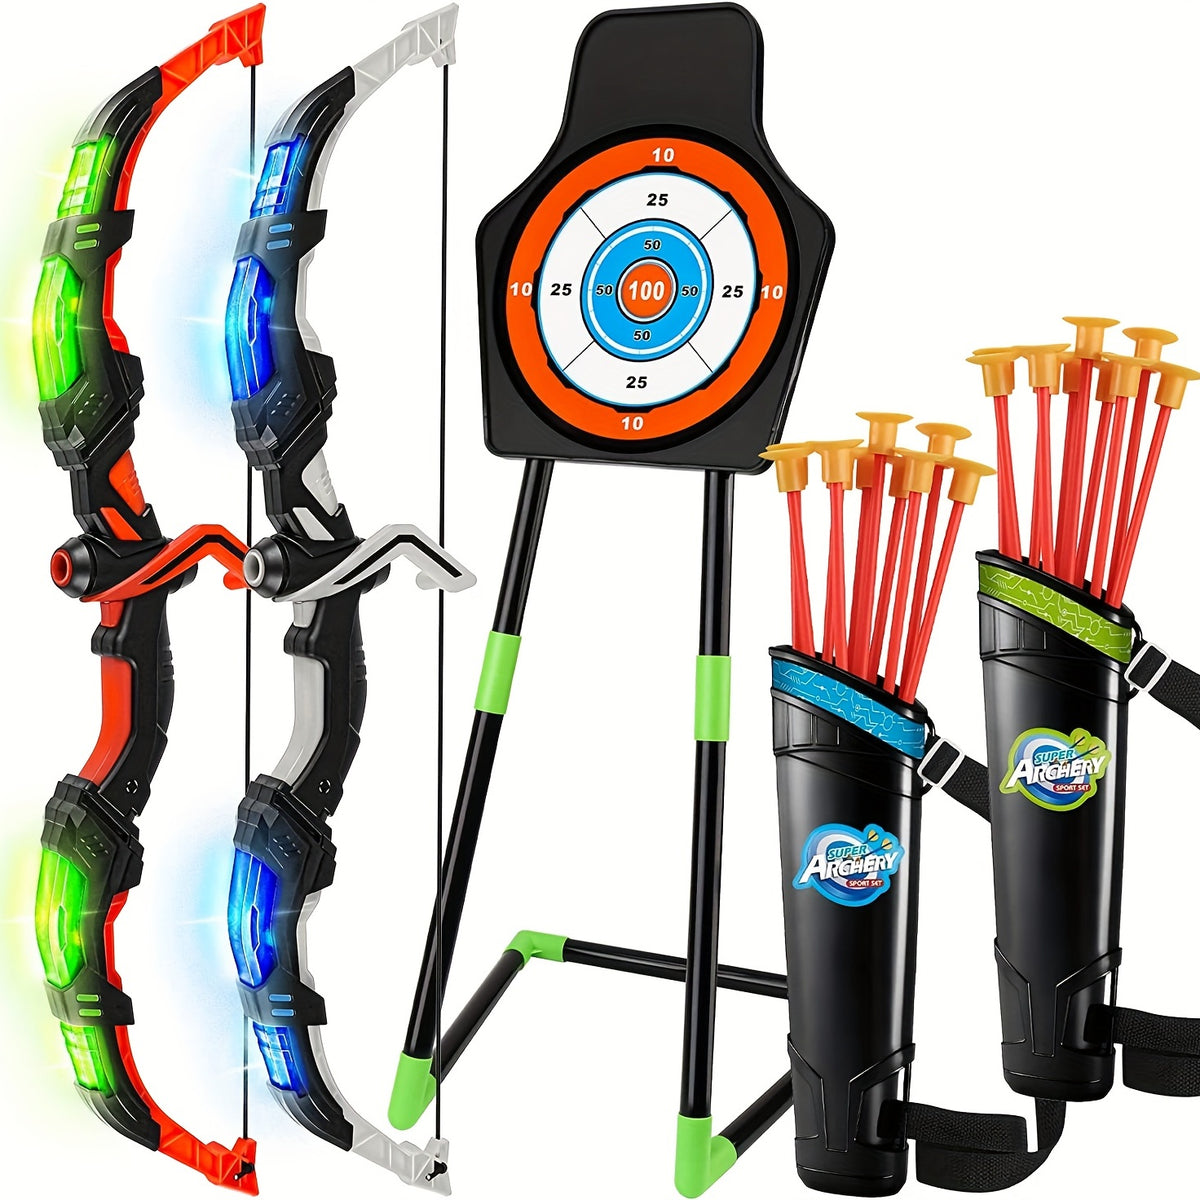 Kids Bow And Arrow Toy Set For Kids 4-6-8-12 Years Old, Archery Toy Set With LED Light - Includes 2 Bows, 20 Suction Cup Arrows, 2 Arrows And 1 Vertical Target